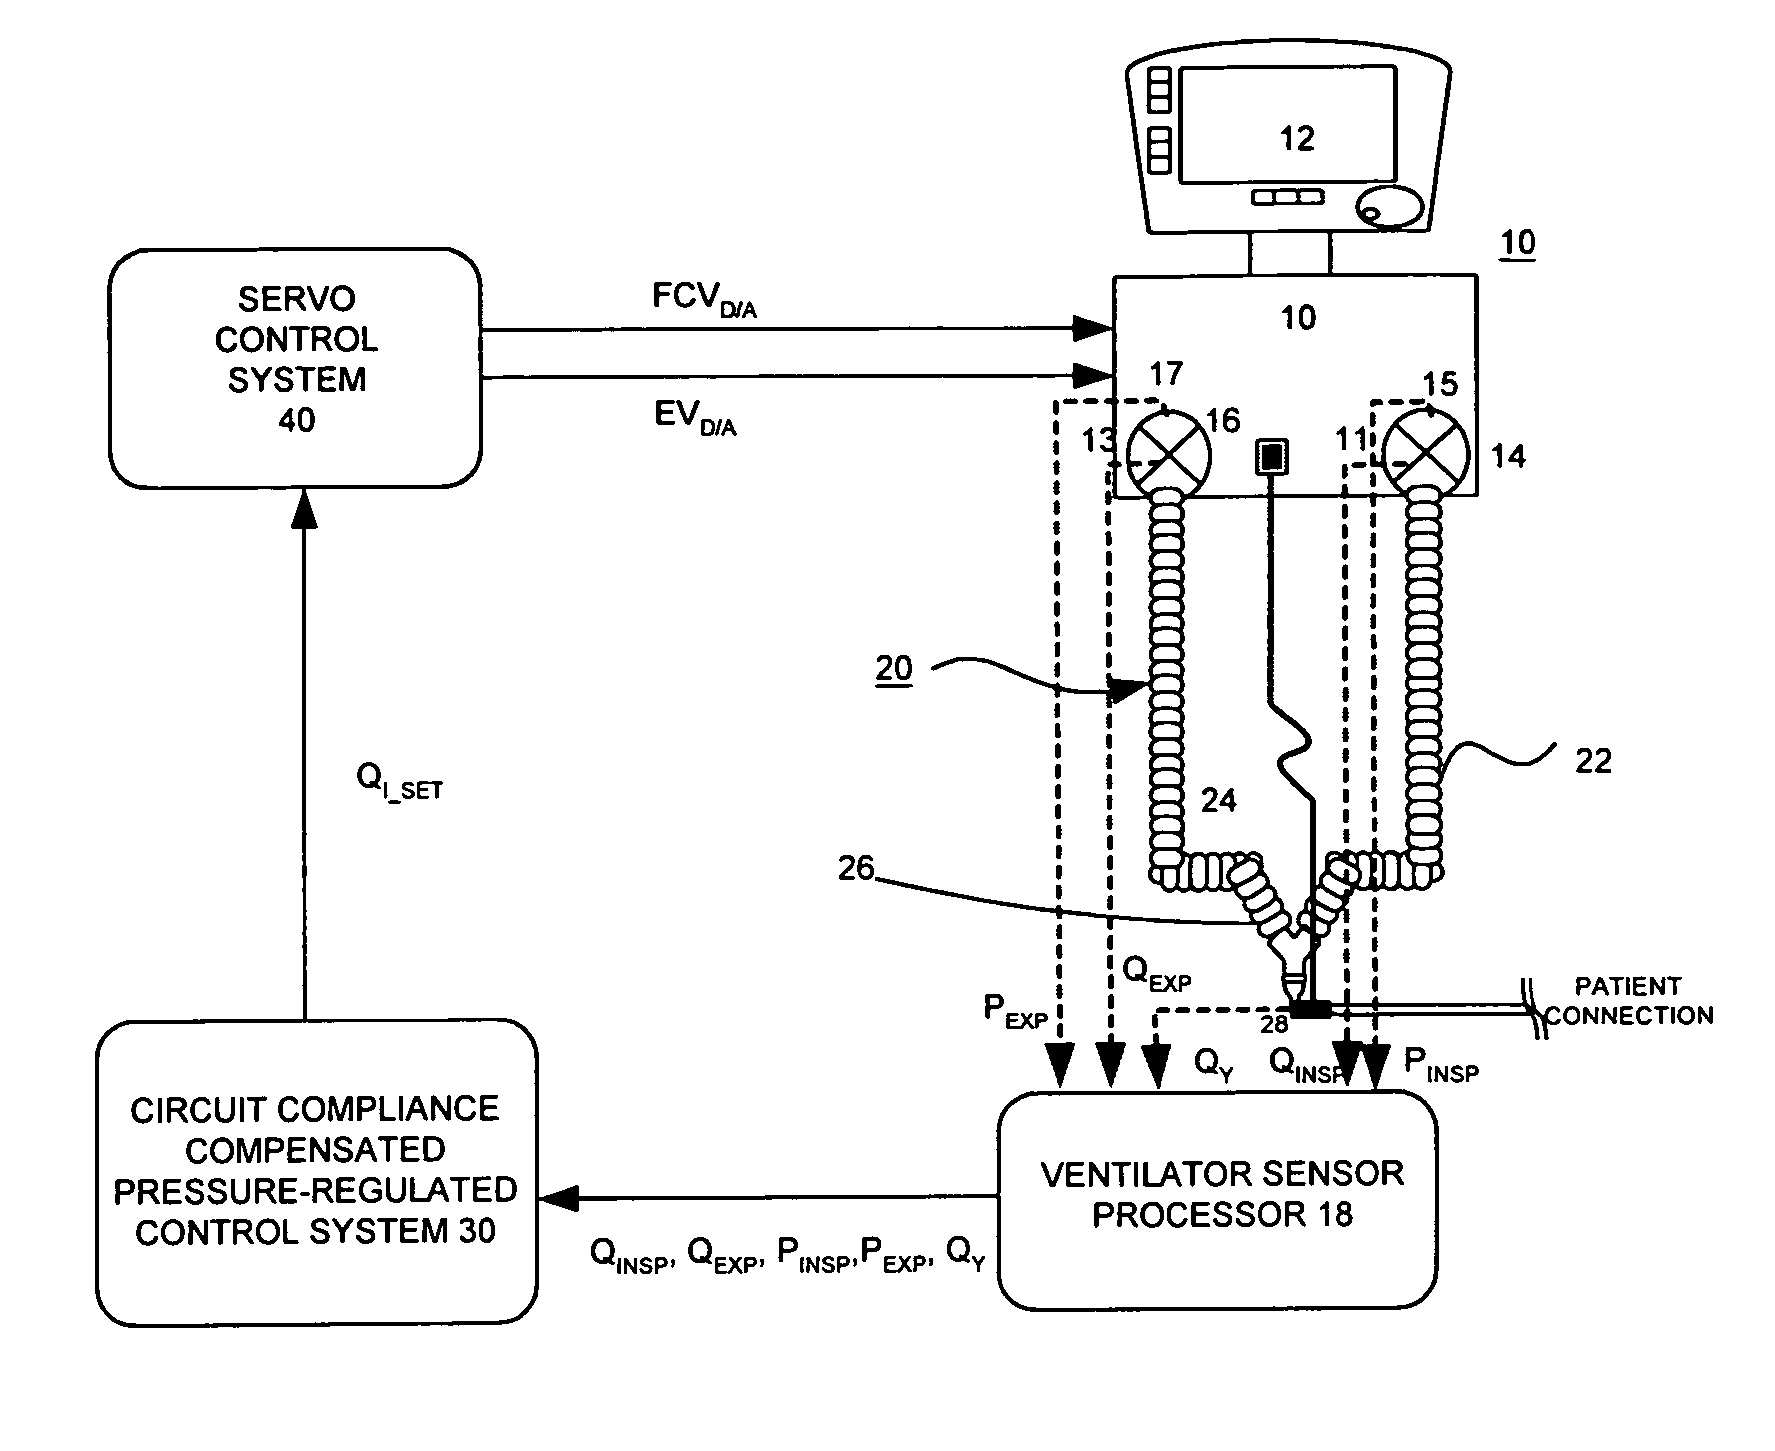 System and method for circuit compliance compensated pressure-regulated volume control in a patient respiratory ventilator